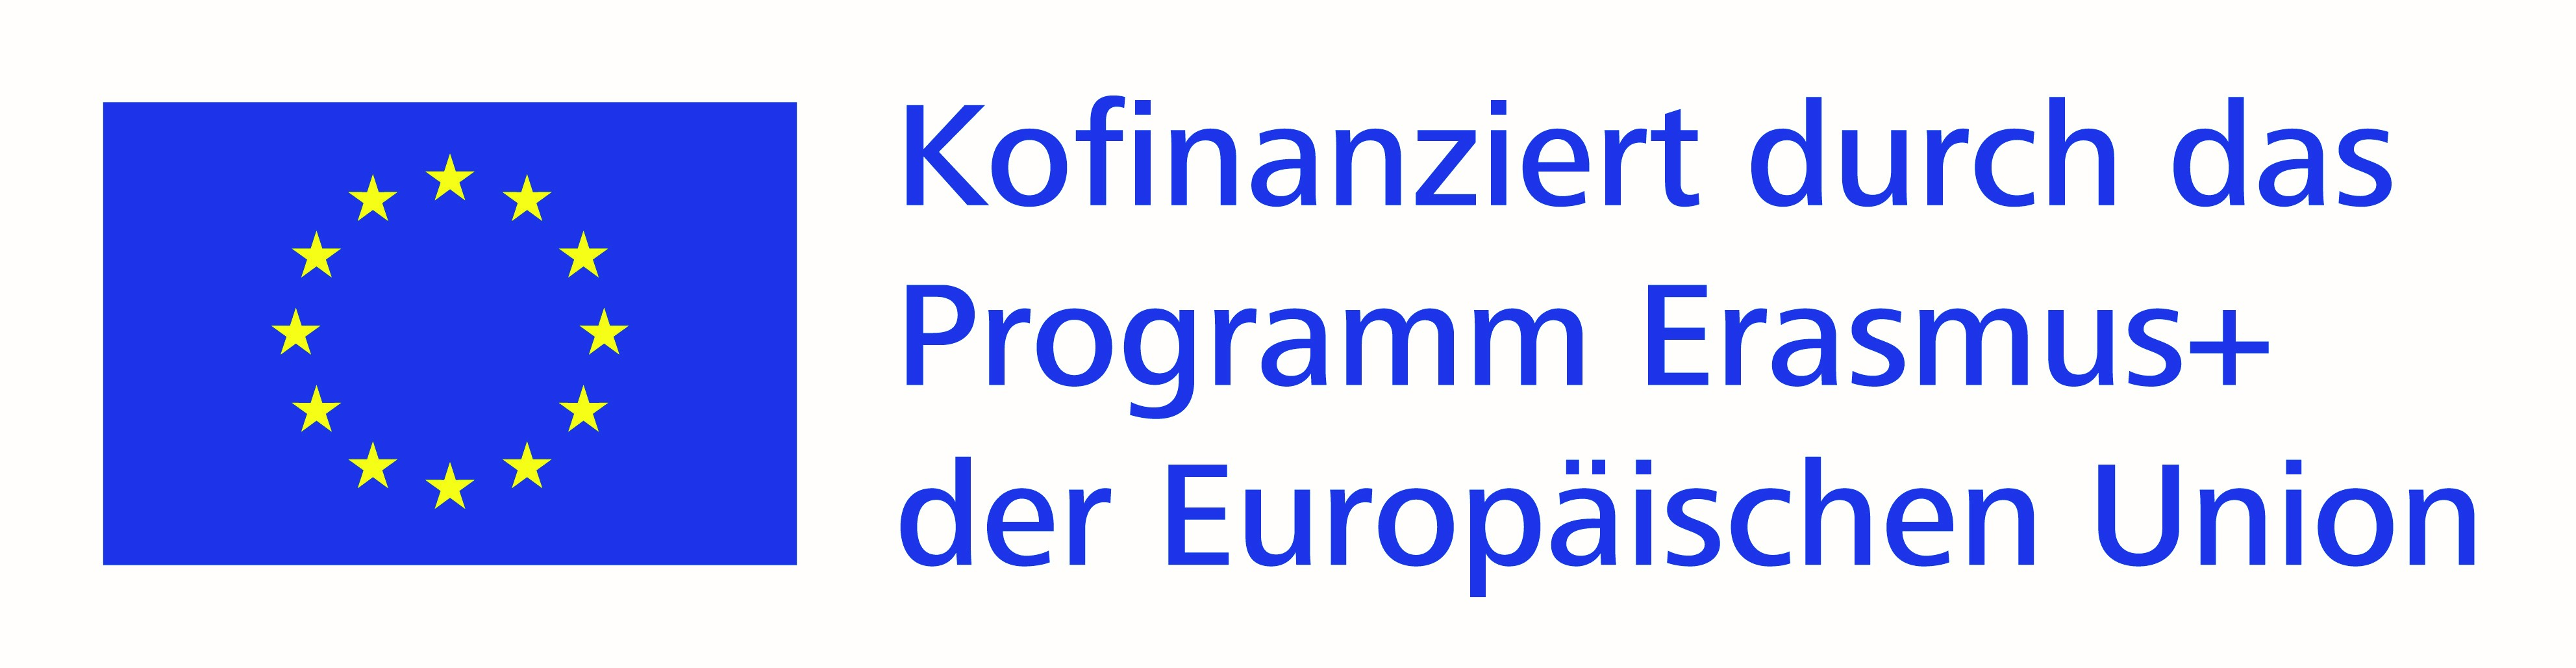 Funded by Erasmus+ adult education mobility, the project runs from 1 July 2020 until 30 June 2022.